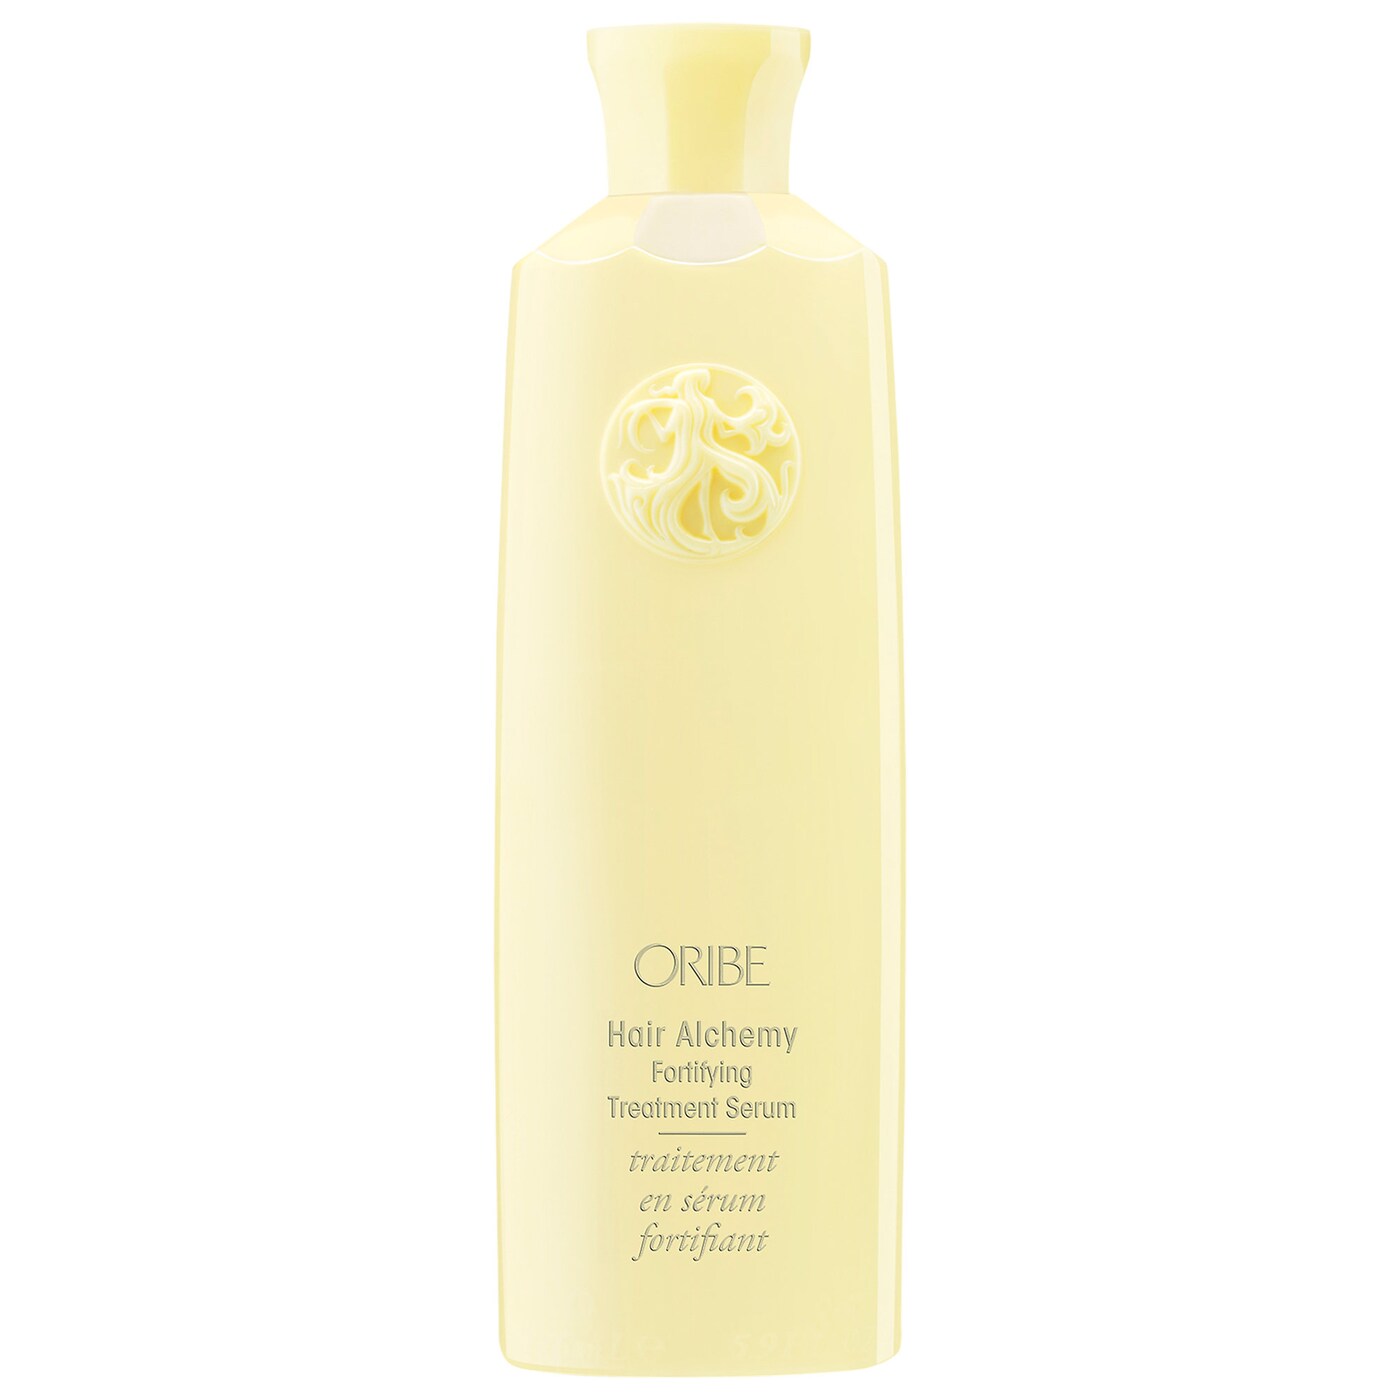 oribe hair alchemy treatment serum, one of the best serums for dry hair